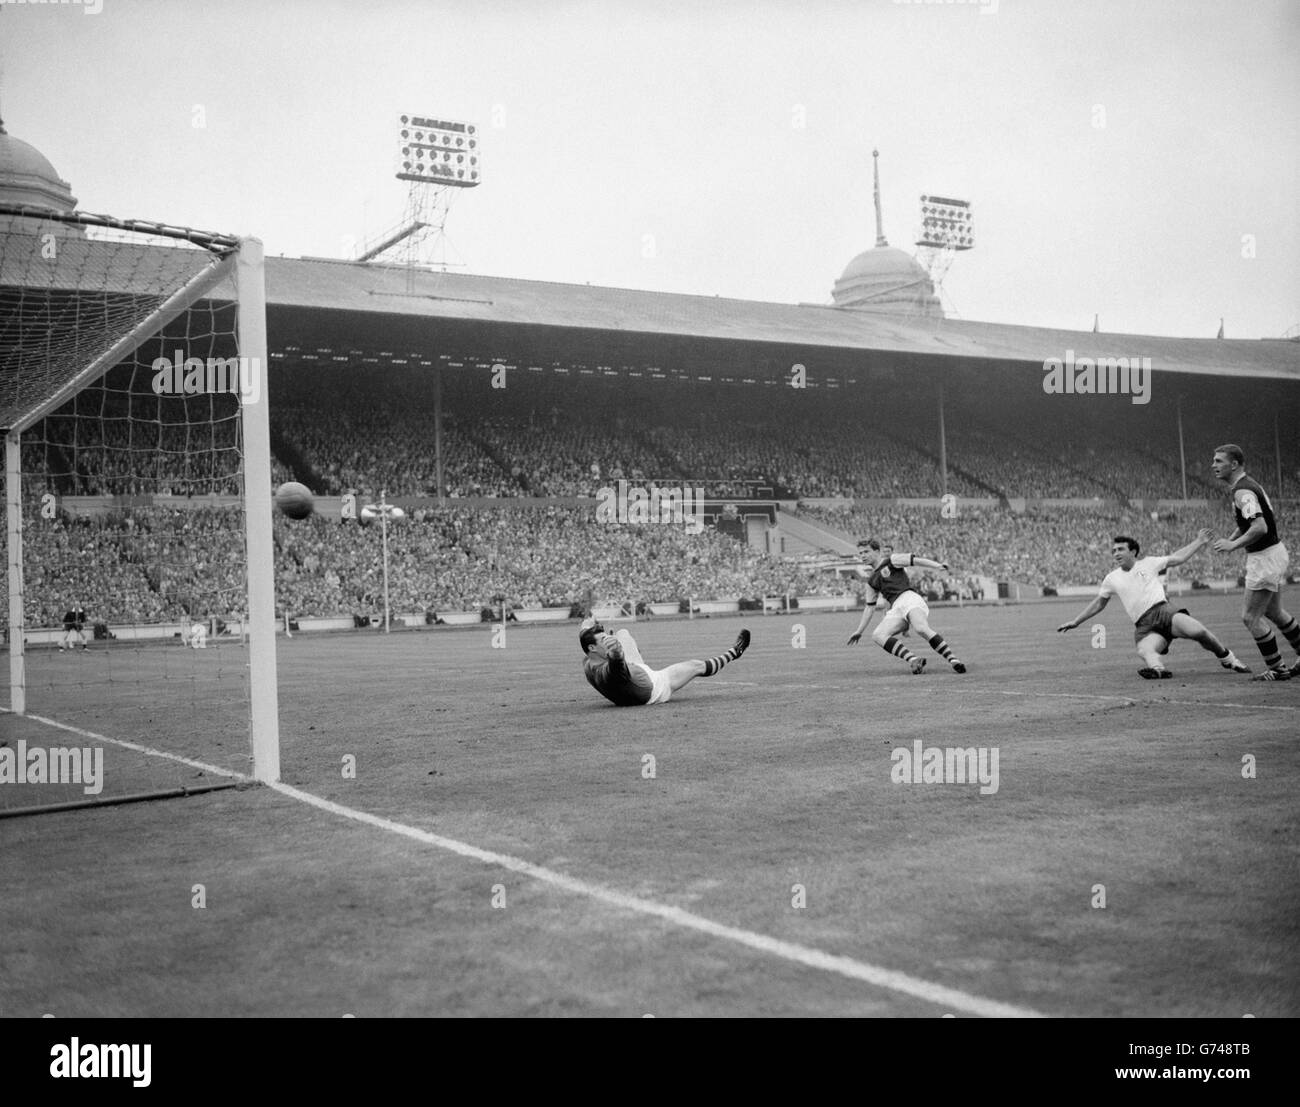 As Burnely goalkeeper Adam Blacklaw rocks helplessly on the turf, the ball sails into the net for Tottenham Hotspur's second goal - it was scored by centre-forward Bobby Smith (white shirt, right) - in the FA Cup Final at the Empire Stadium, Wembley. This goal put Spurs 2-1 ahead, and they wwere leading for the second time in the match. They won 3-1 to retain the cup. Stock Photo